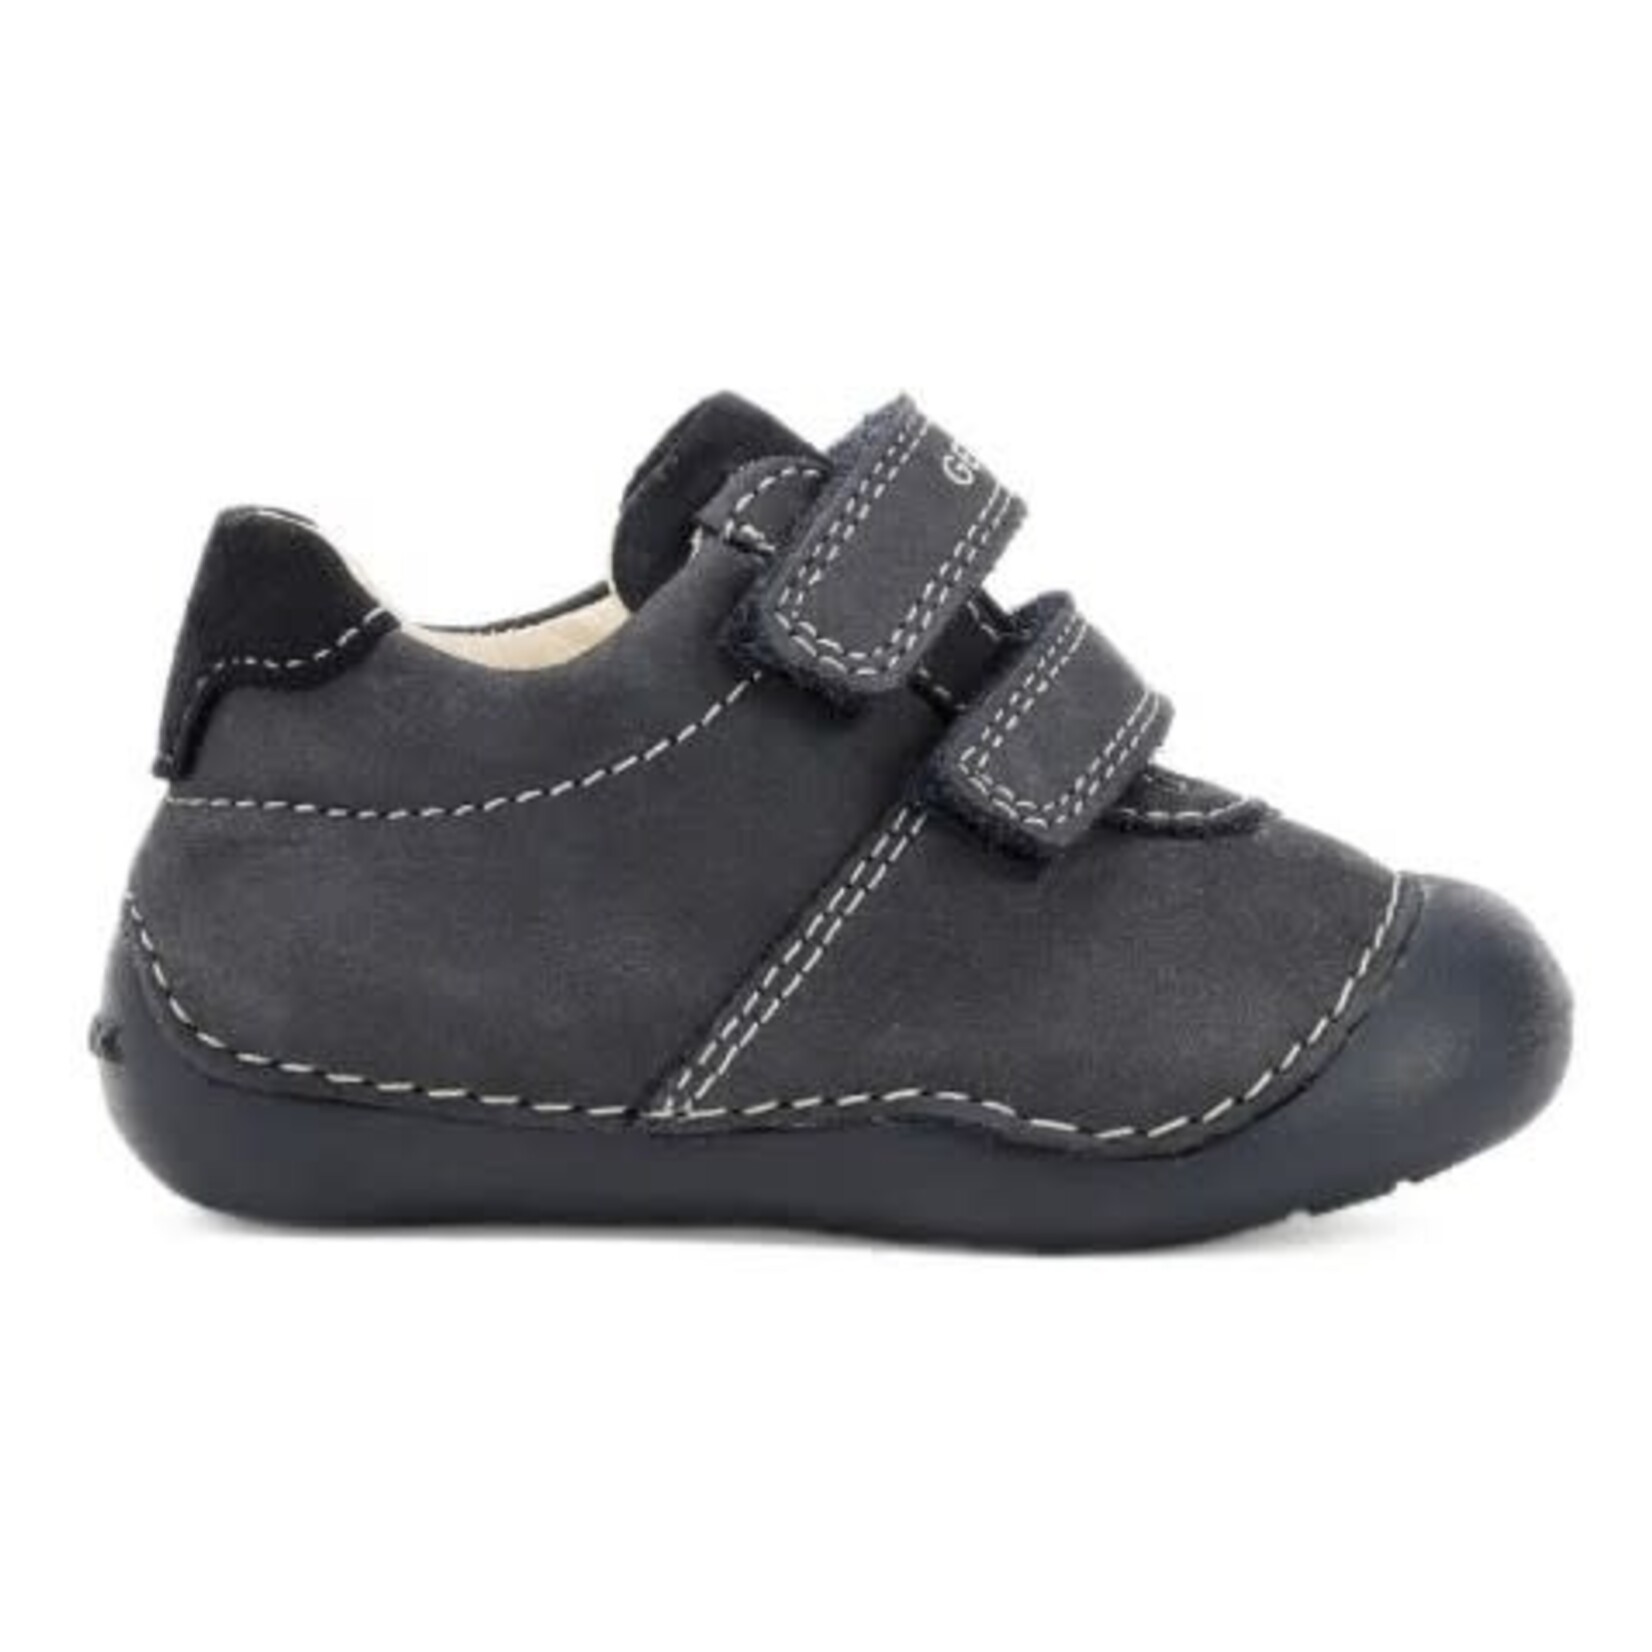 Geox GEOX - First steps soft soled leather shoes 'Tutim - Dark Navy'